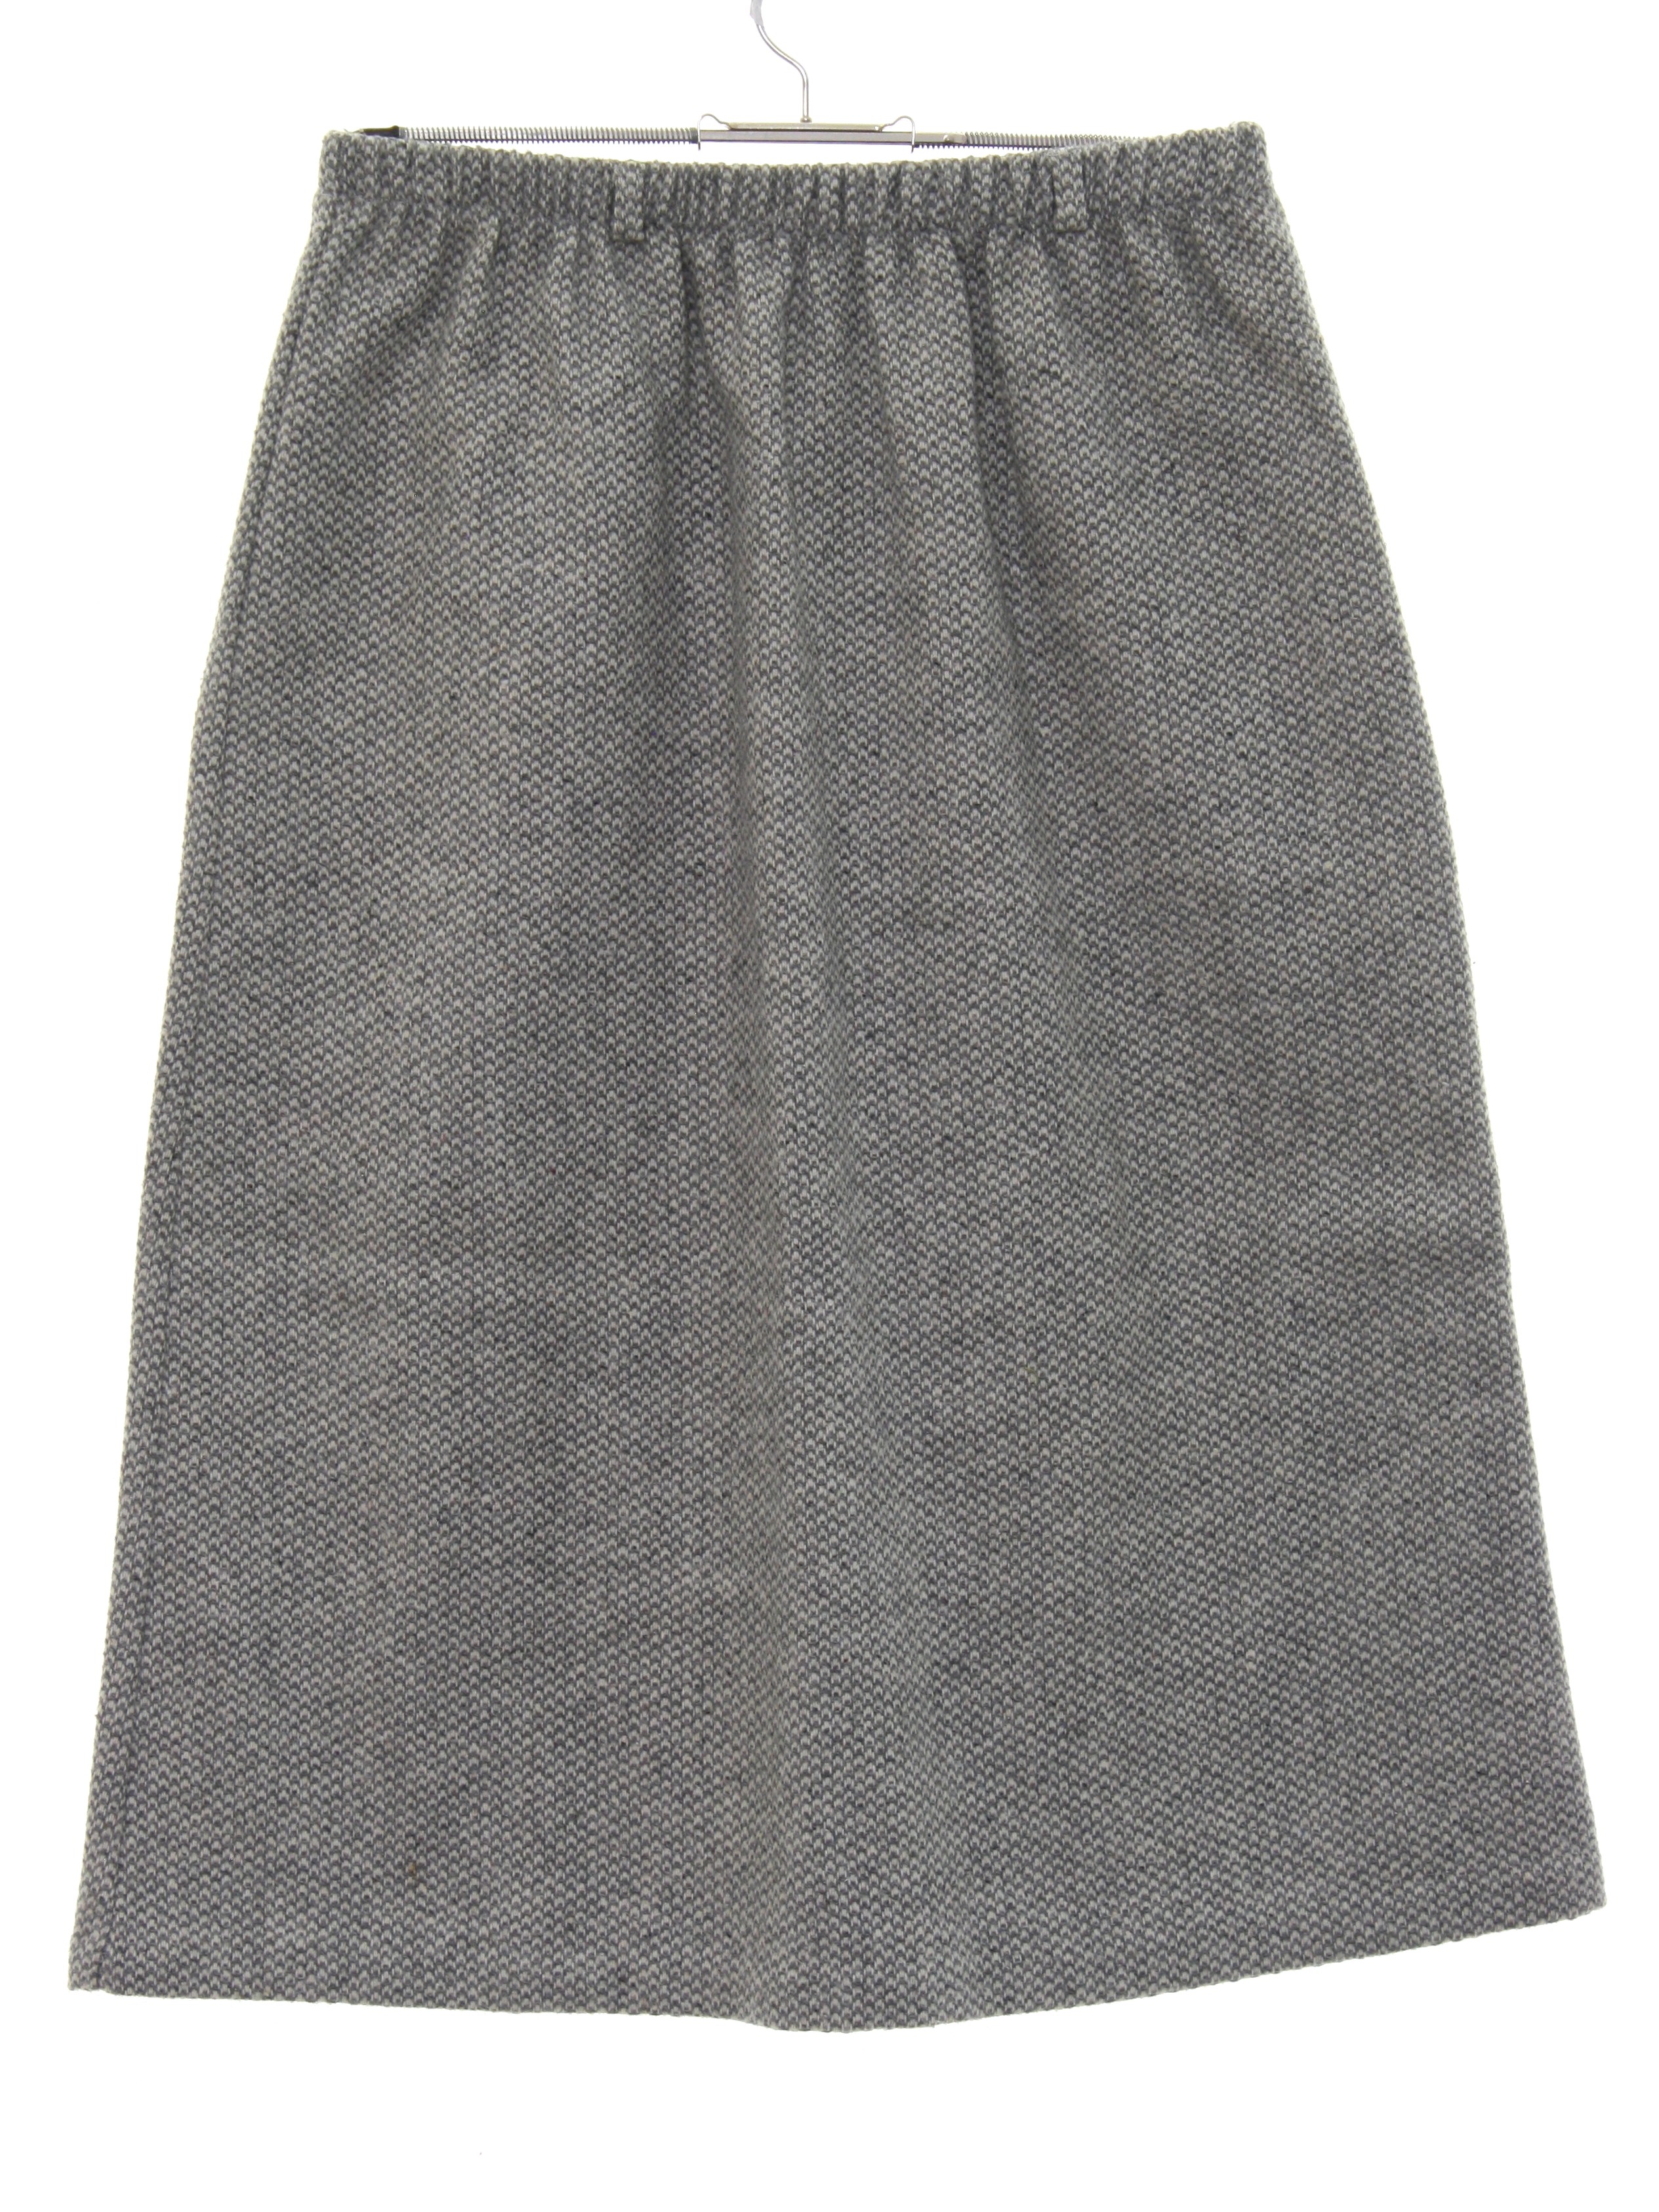 1980's Vintage Russ Toggs Skirt: 80s -Russ Toggs- Womens shaded grey ...